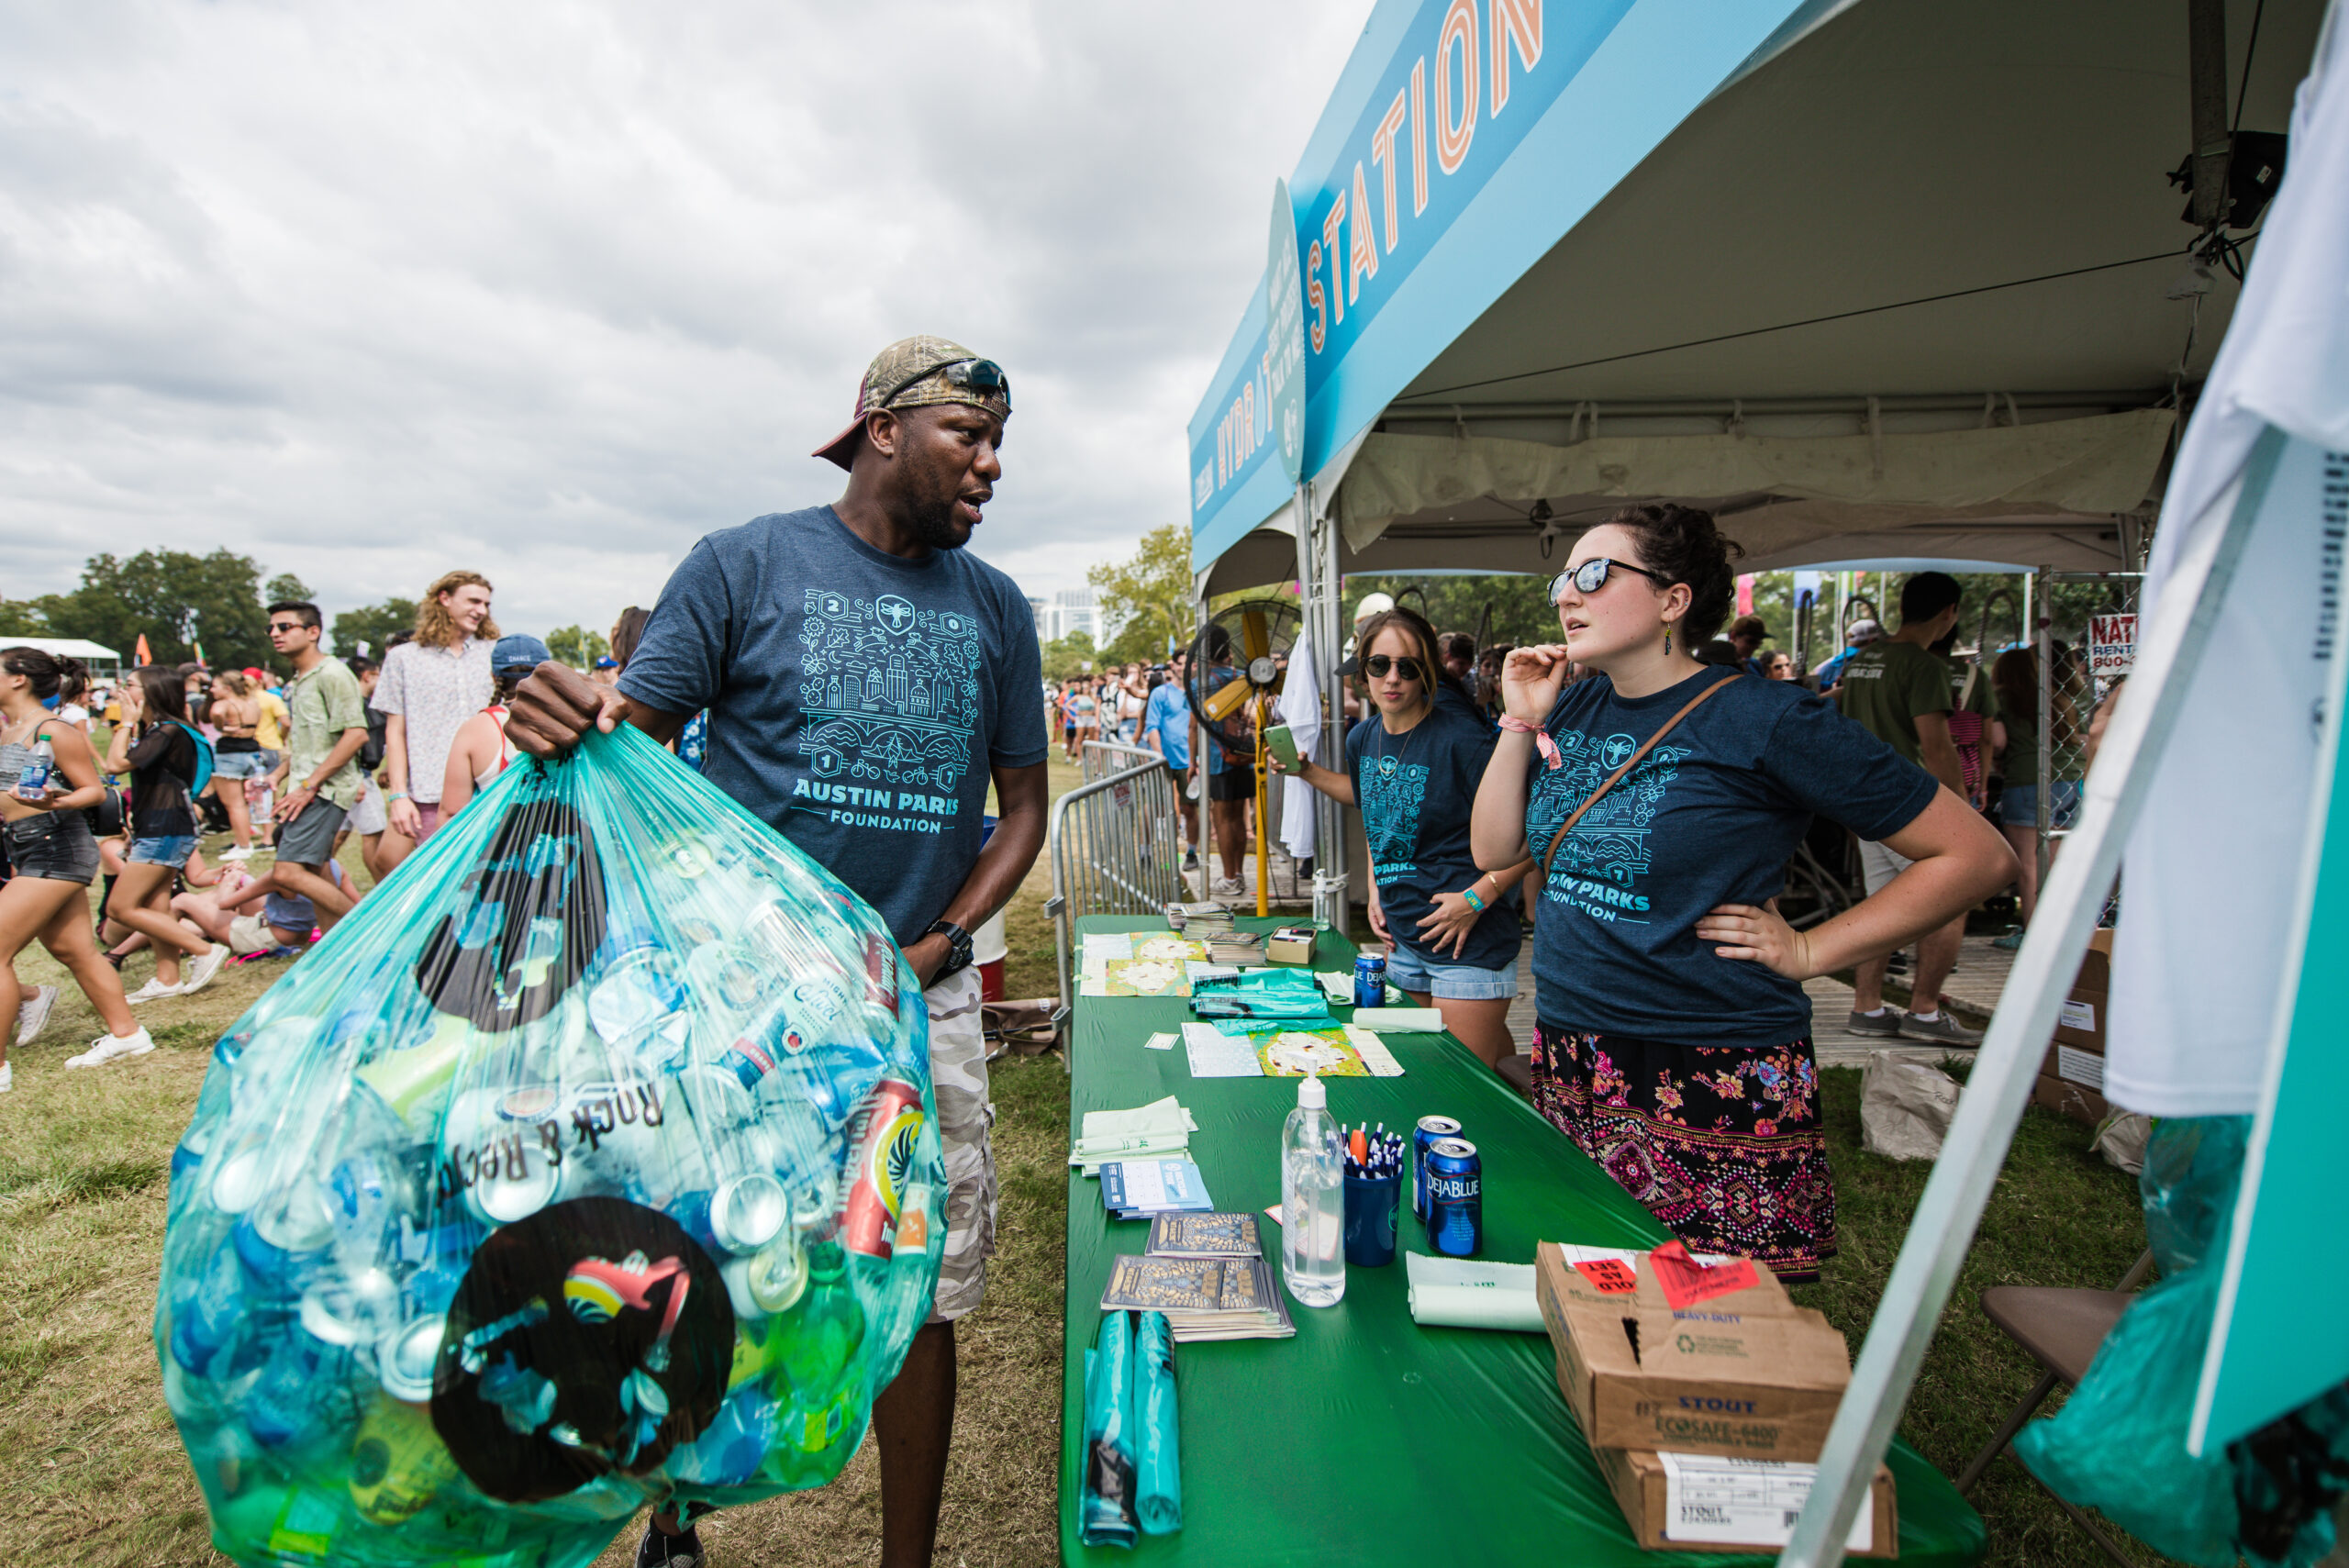 apotheker cliënt Authenticatie Keeping it green (and clean) at ACL Music Festival - Austin Parks Foundation